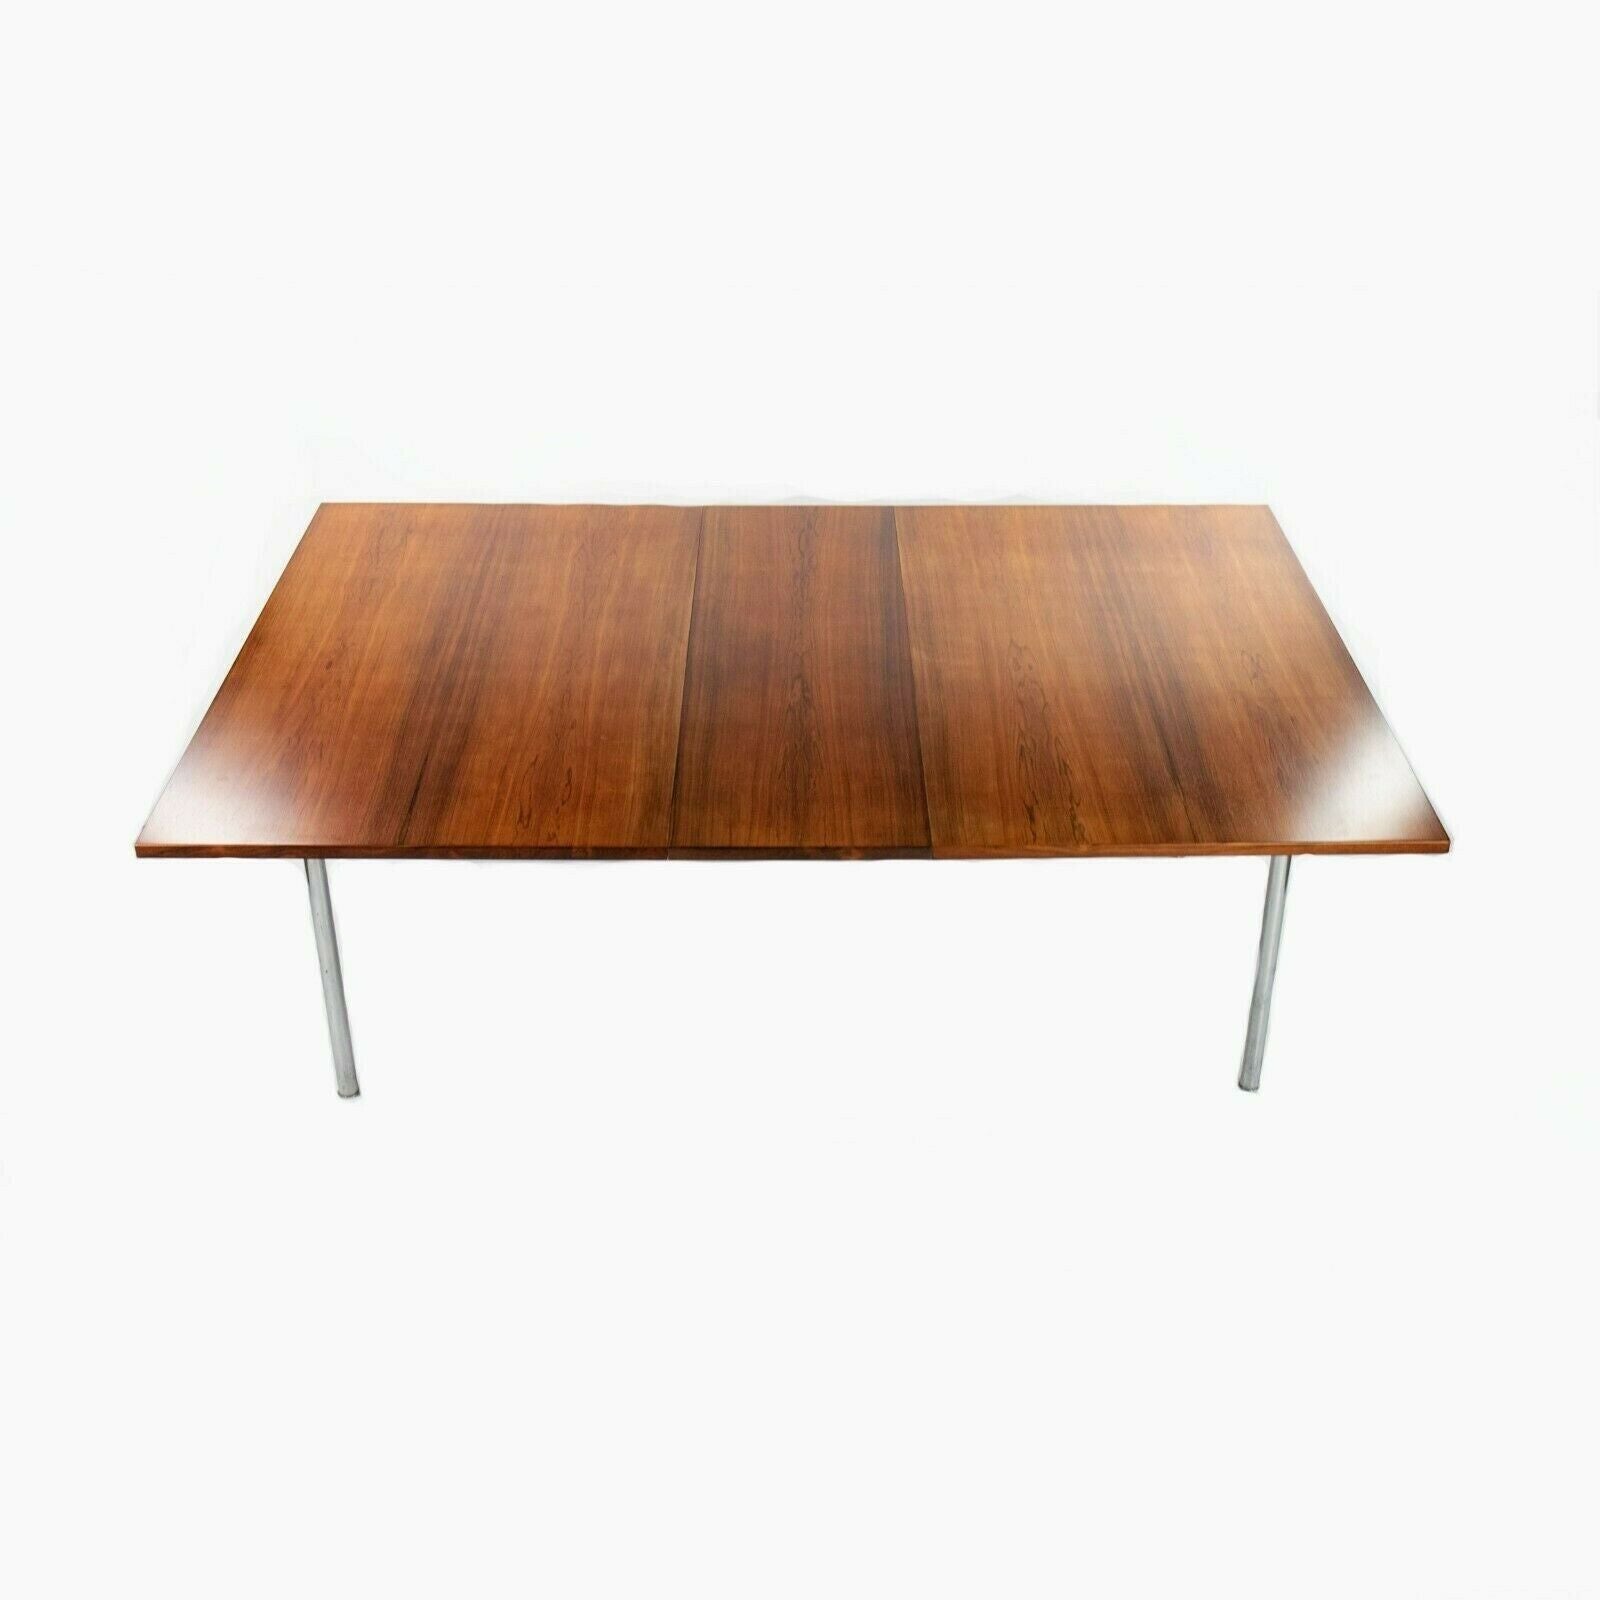 1960 Hans J. Wegner for Andreas Tuck Model AT321 Dining Table in Rosewood and Chromed Steel